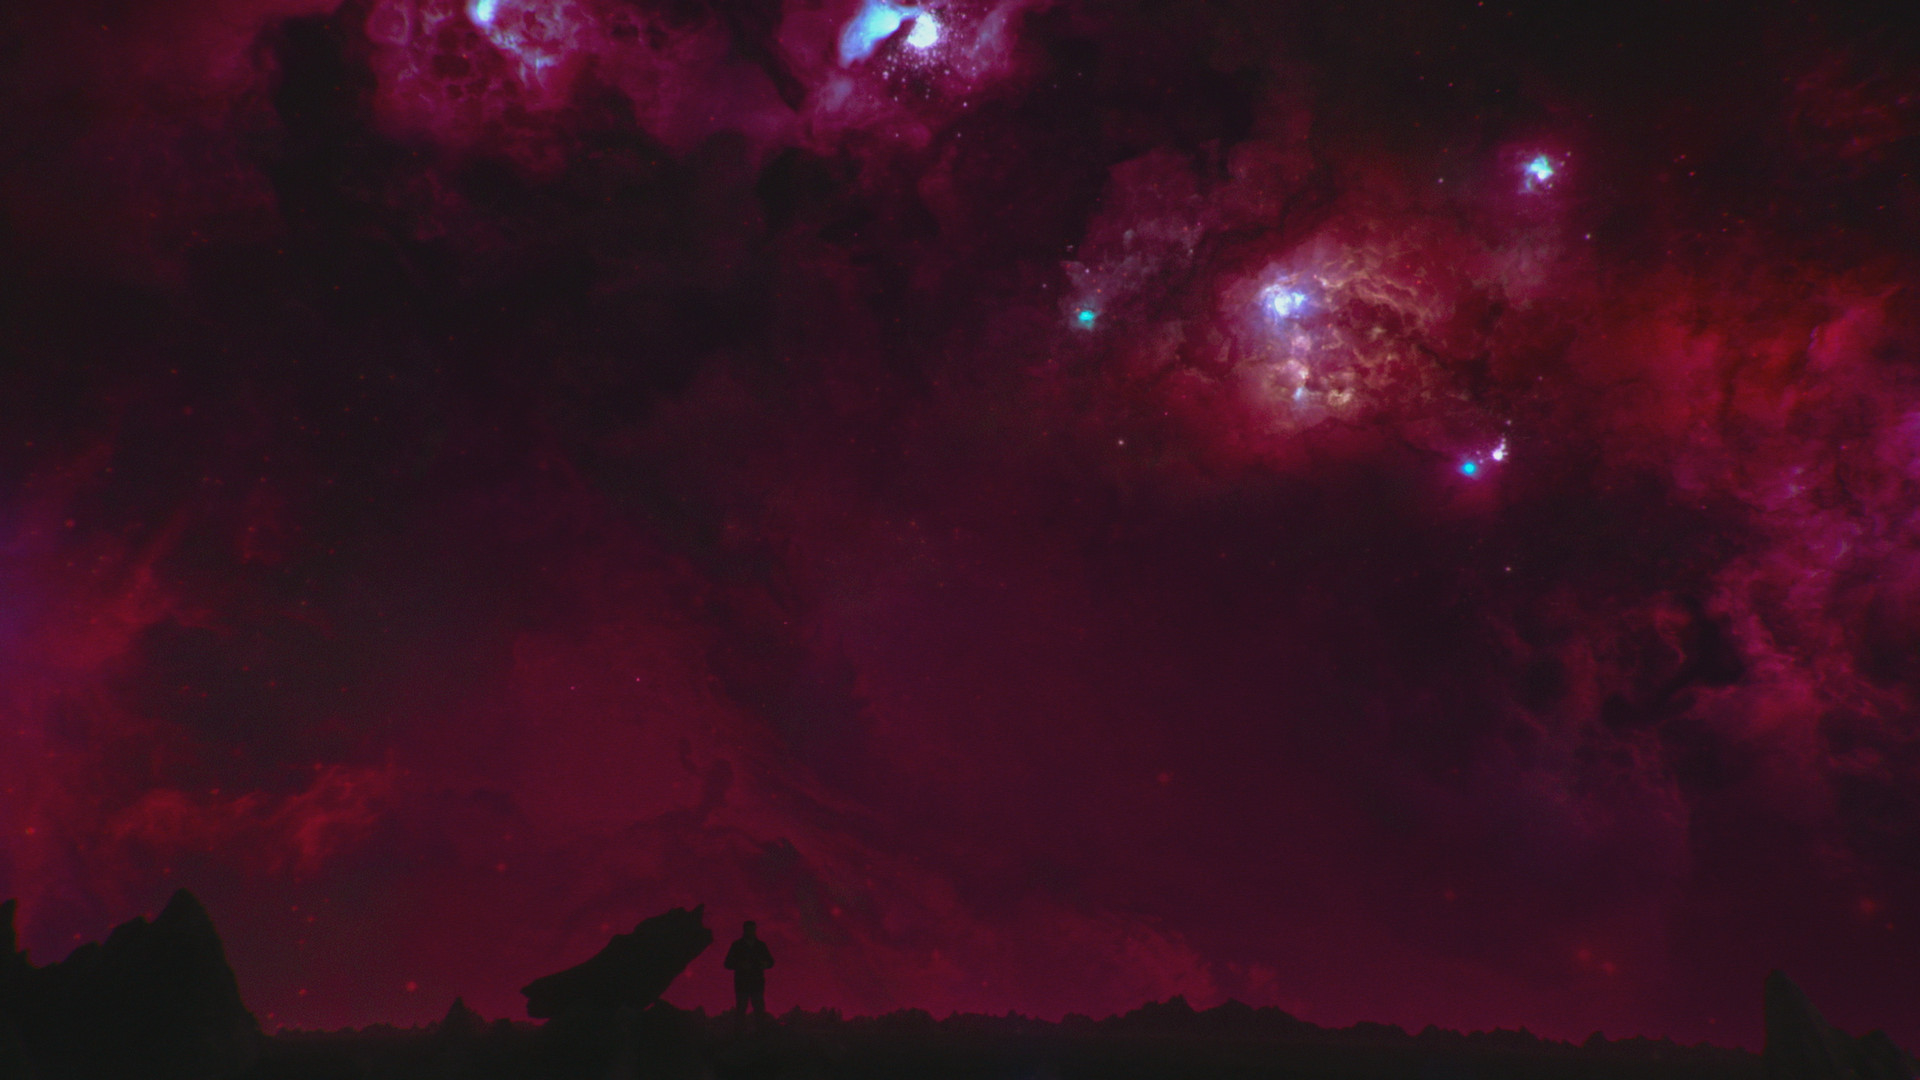 A flashback to an alien planet in the Milky Way 11 billion years ago, as host Neil deGrasse Tyson witnesses stars being born. COSMOS: POSSIBLE WORLDS premieres March 9, 2020 on National Geographic. (Cosmos Studios)